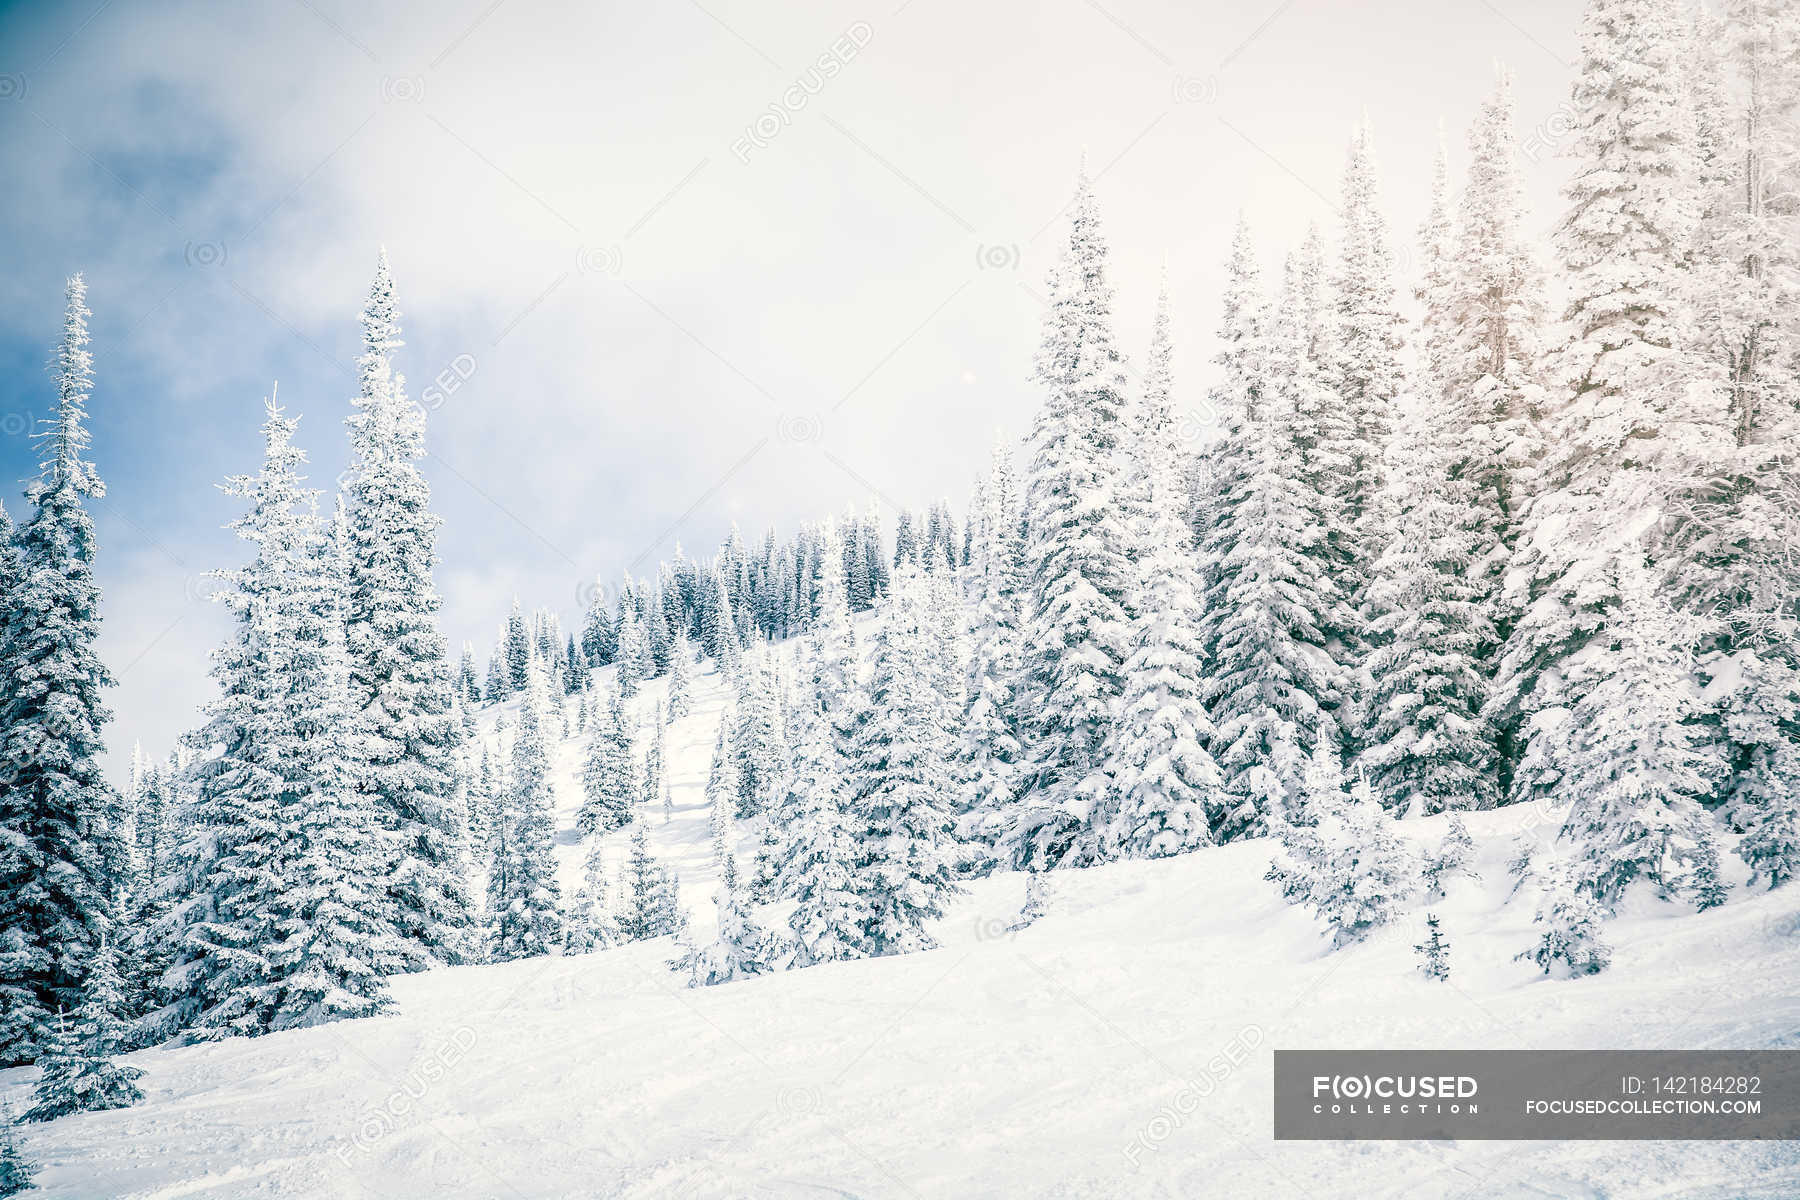 Snow Covered Landscape And Evergreens, Snow Covered Landscape